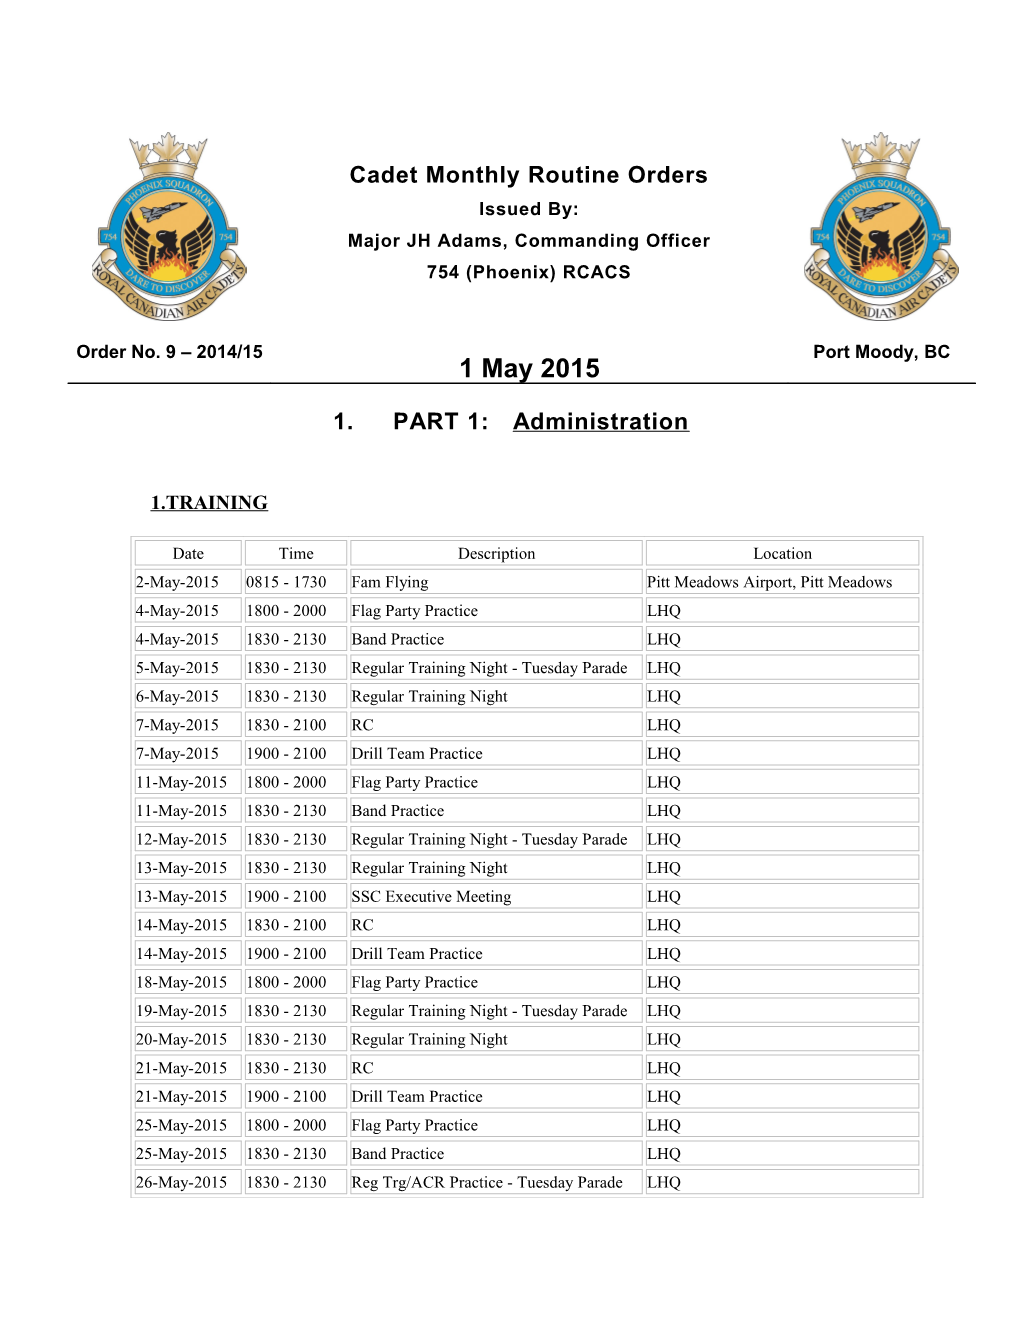 Cadet Monthly Routine Ordersissued By:Majorjhadams, Commanding Officer754 (Phoenix) RCACS